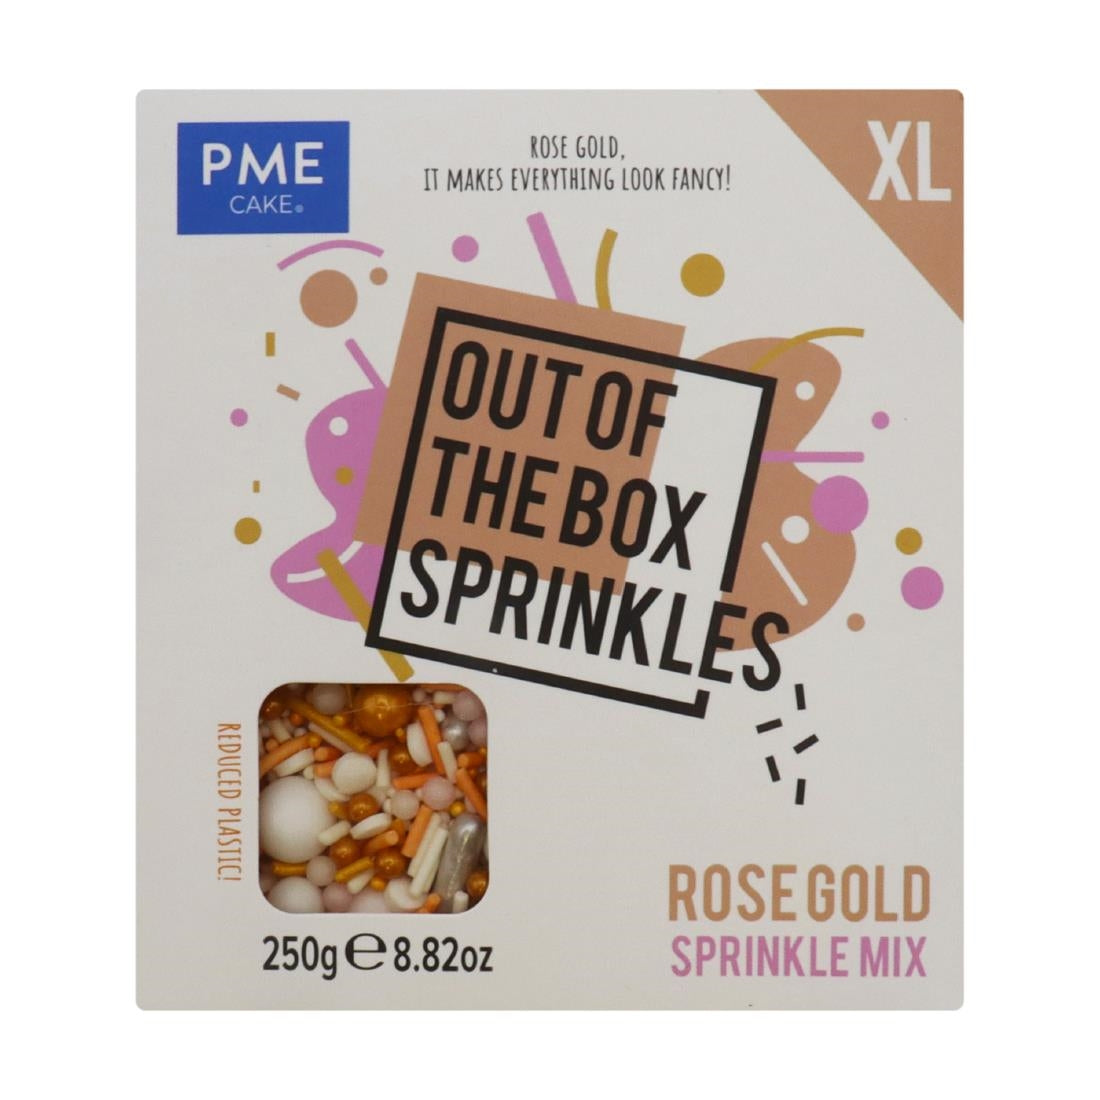 HU364 PME XL Out of the Box Sprinkle Mix Rose Gold 250g